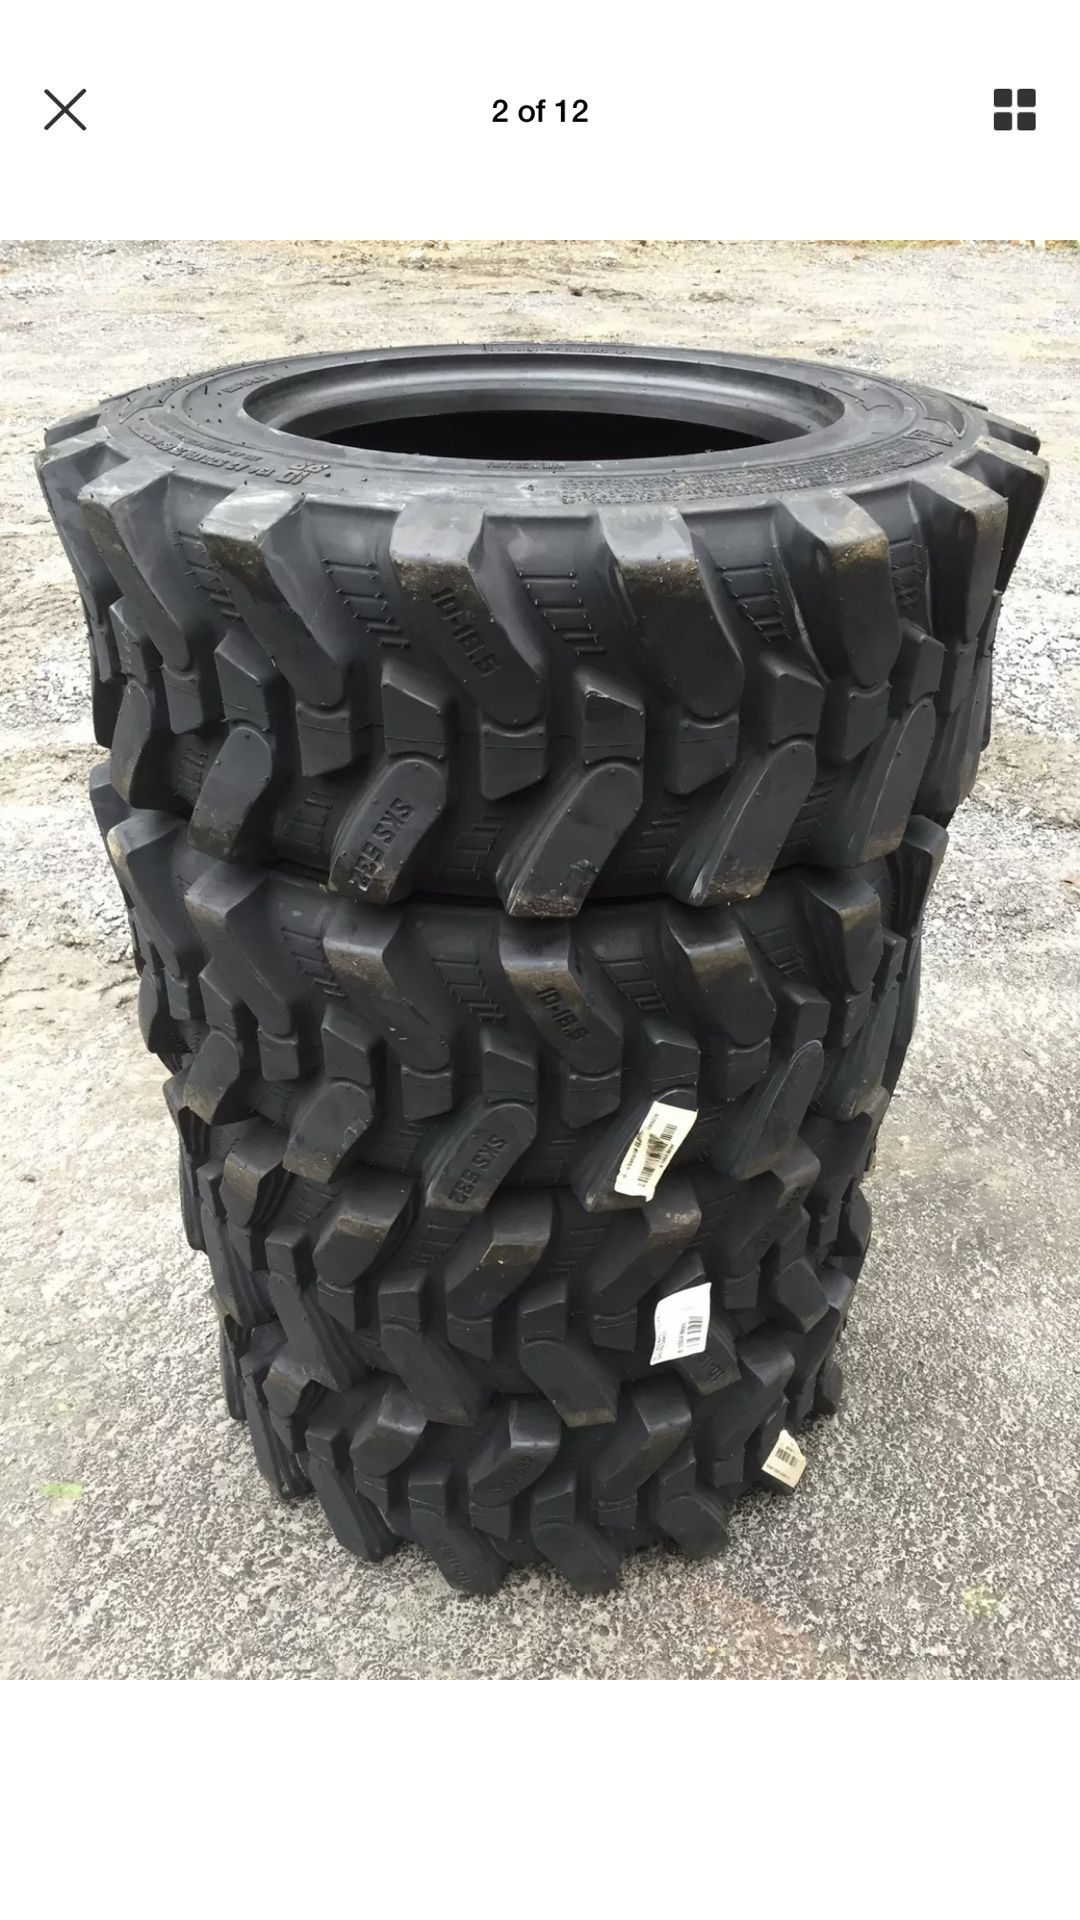 4x 10-16.5 12ply Skid Steer Tire brand new $425 no bargain price firm